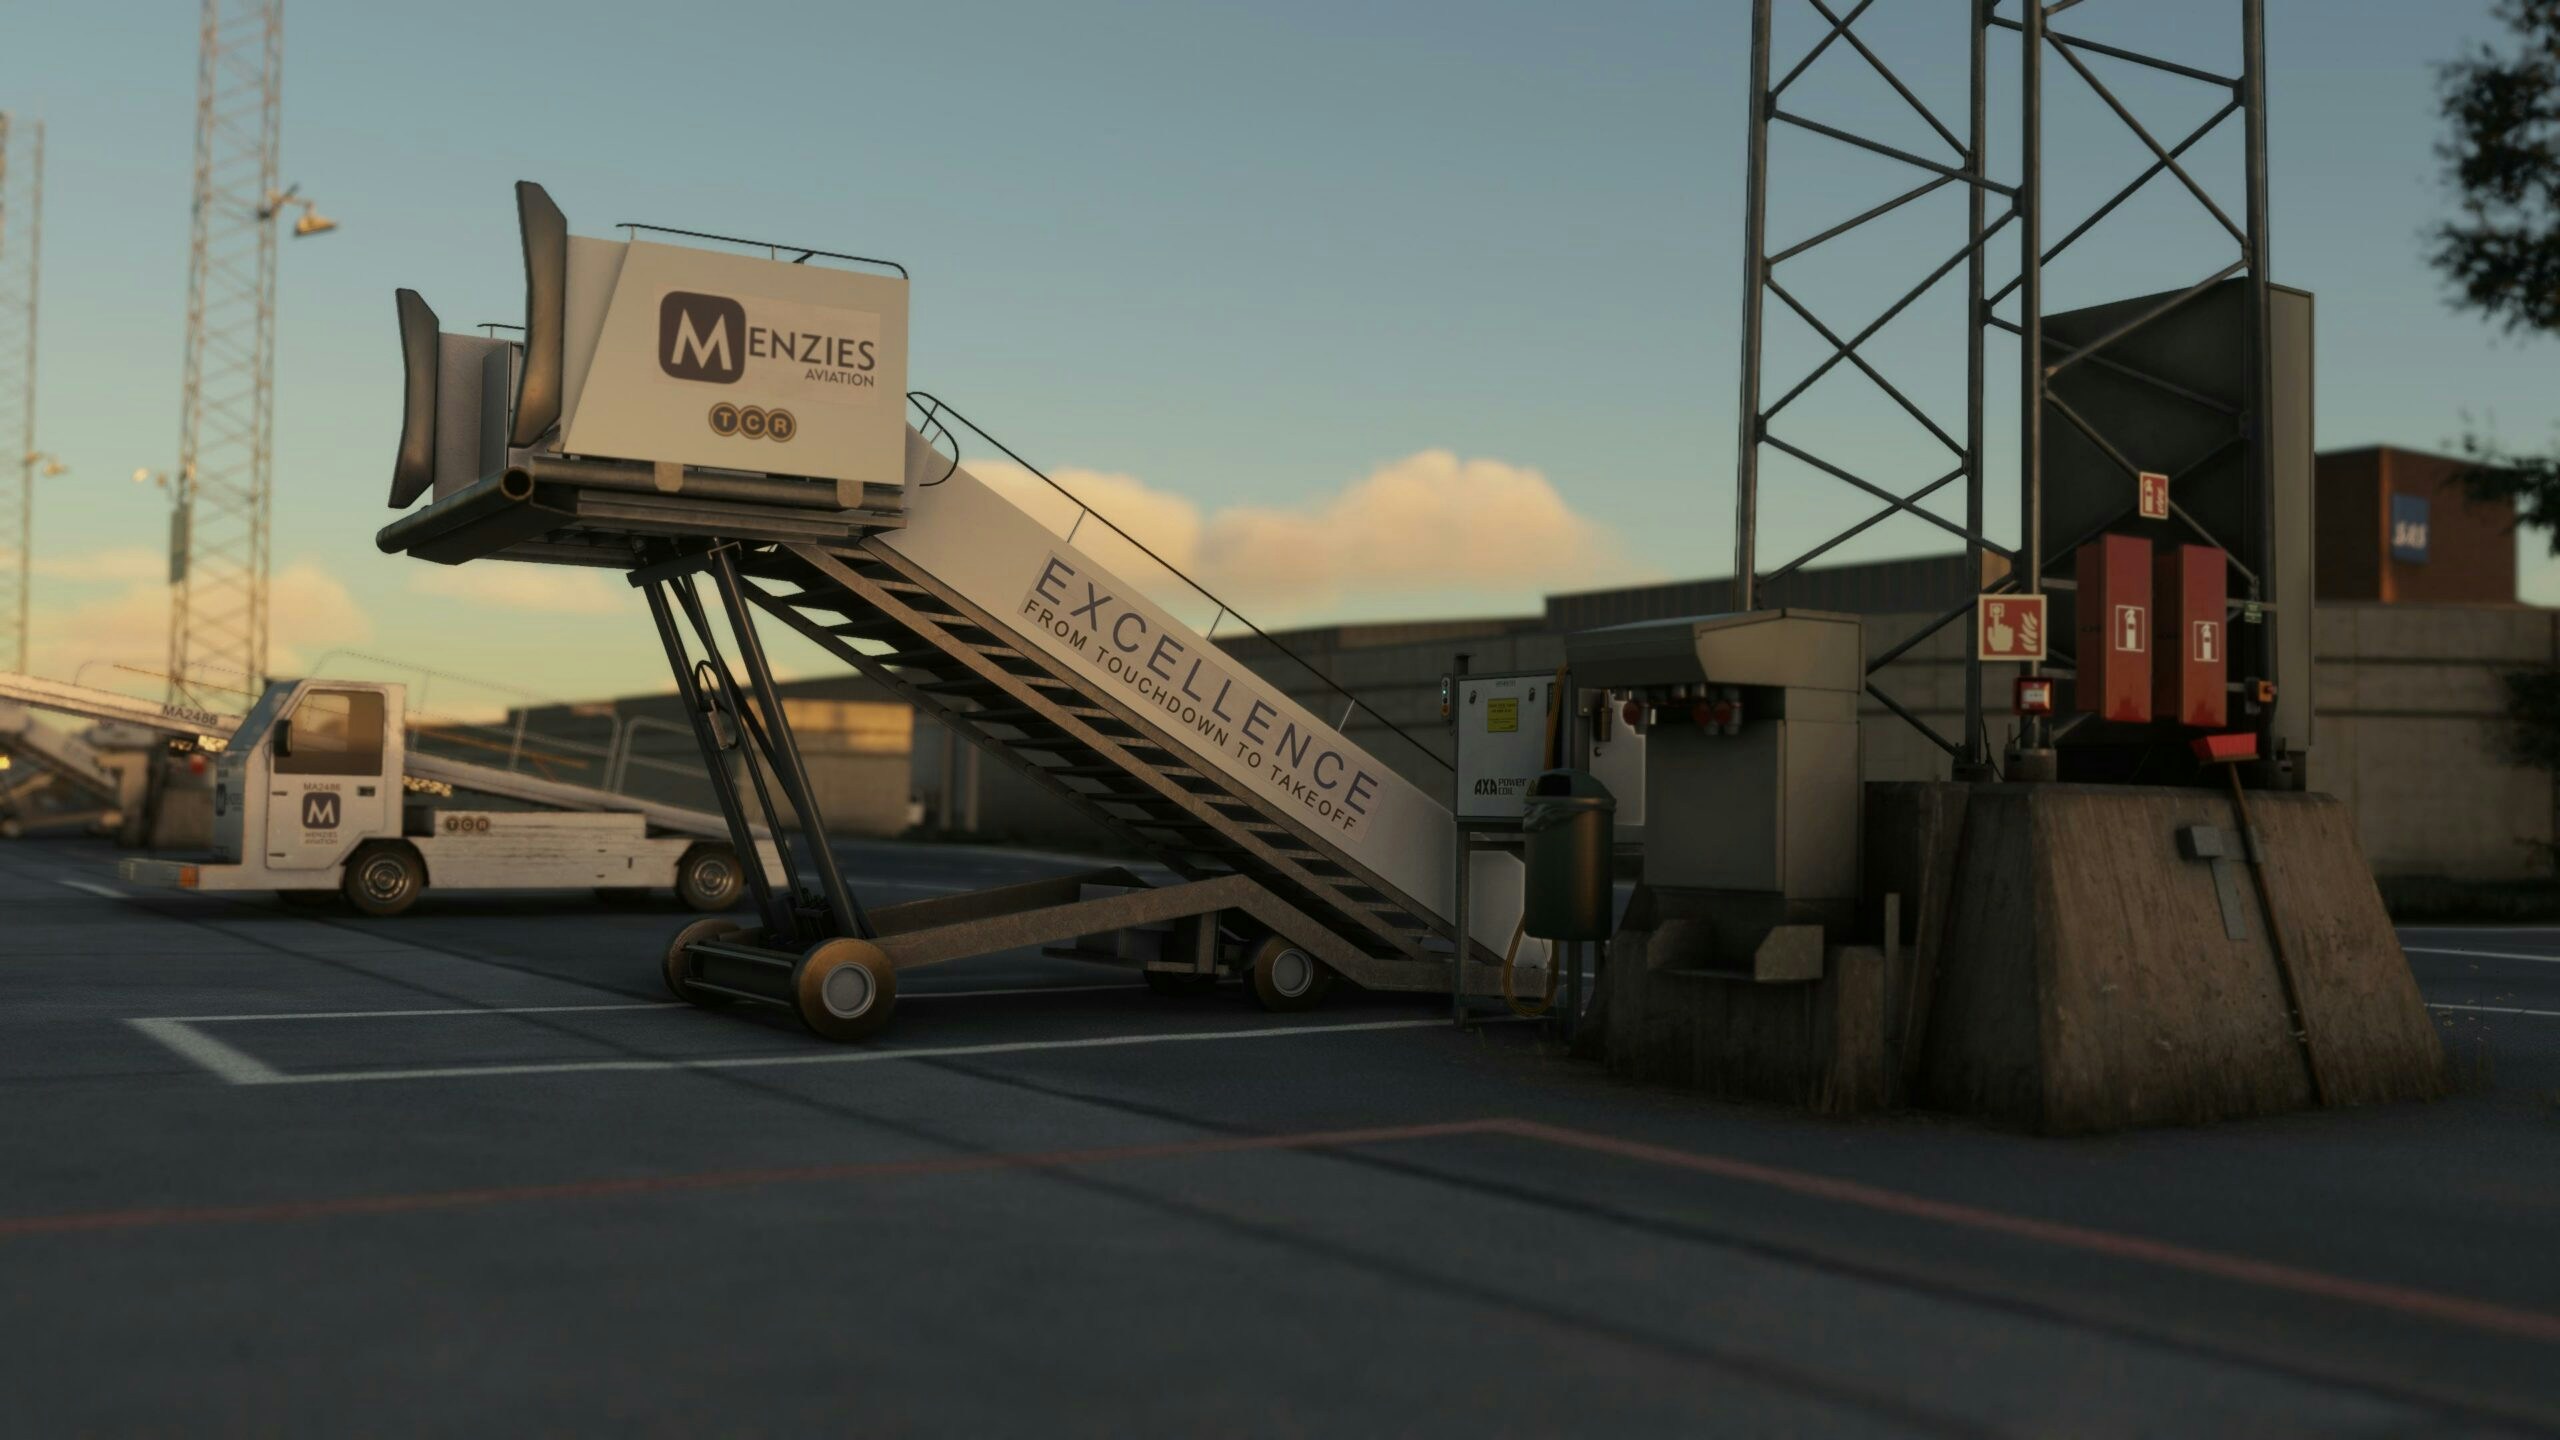 Aerosoft Previews Oslo Airport for MSFS